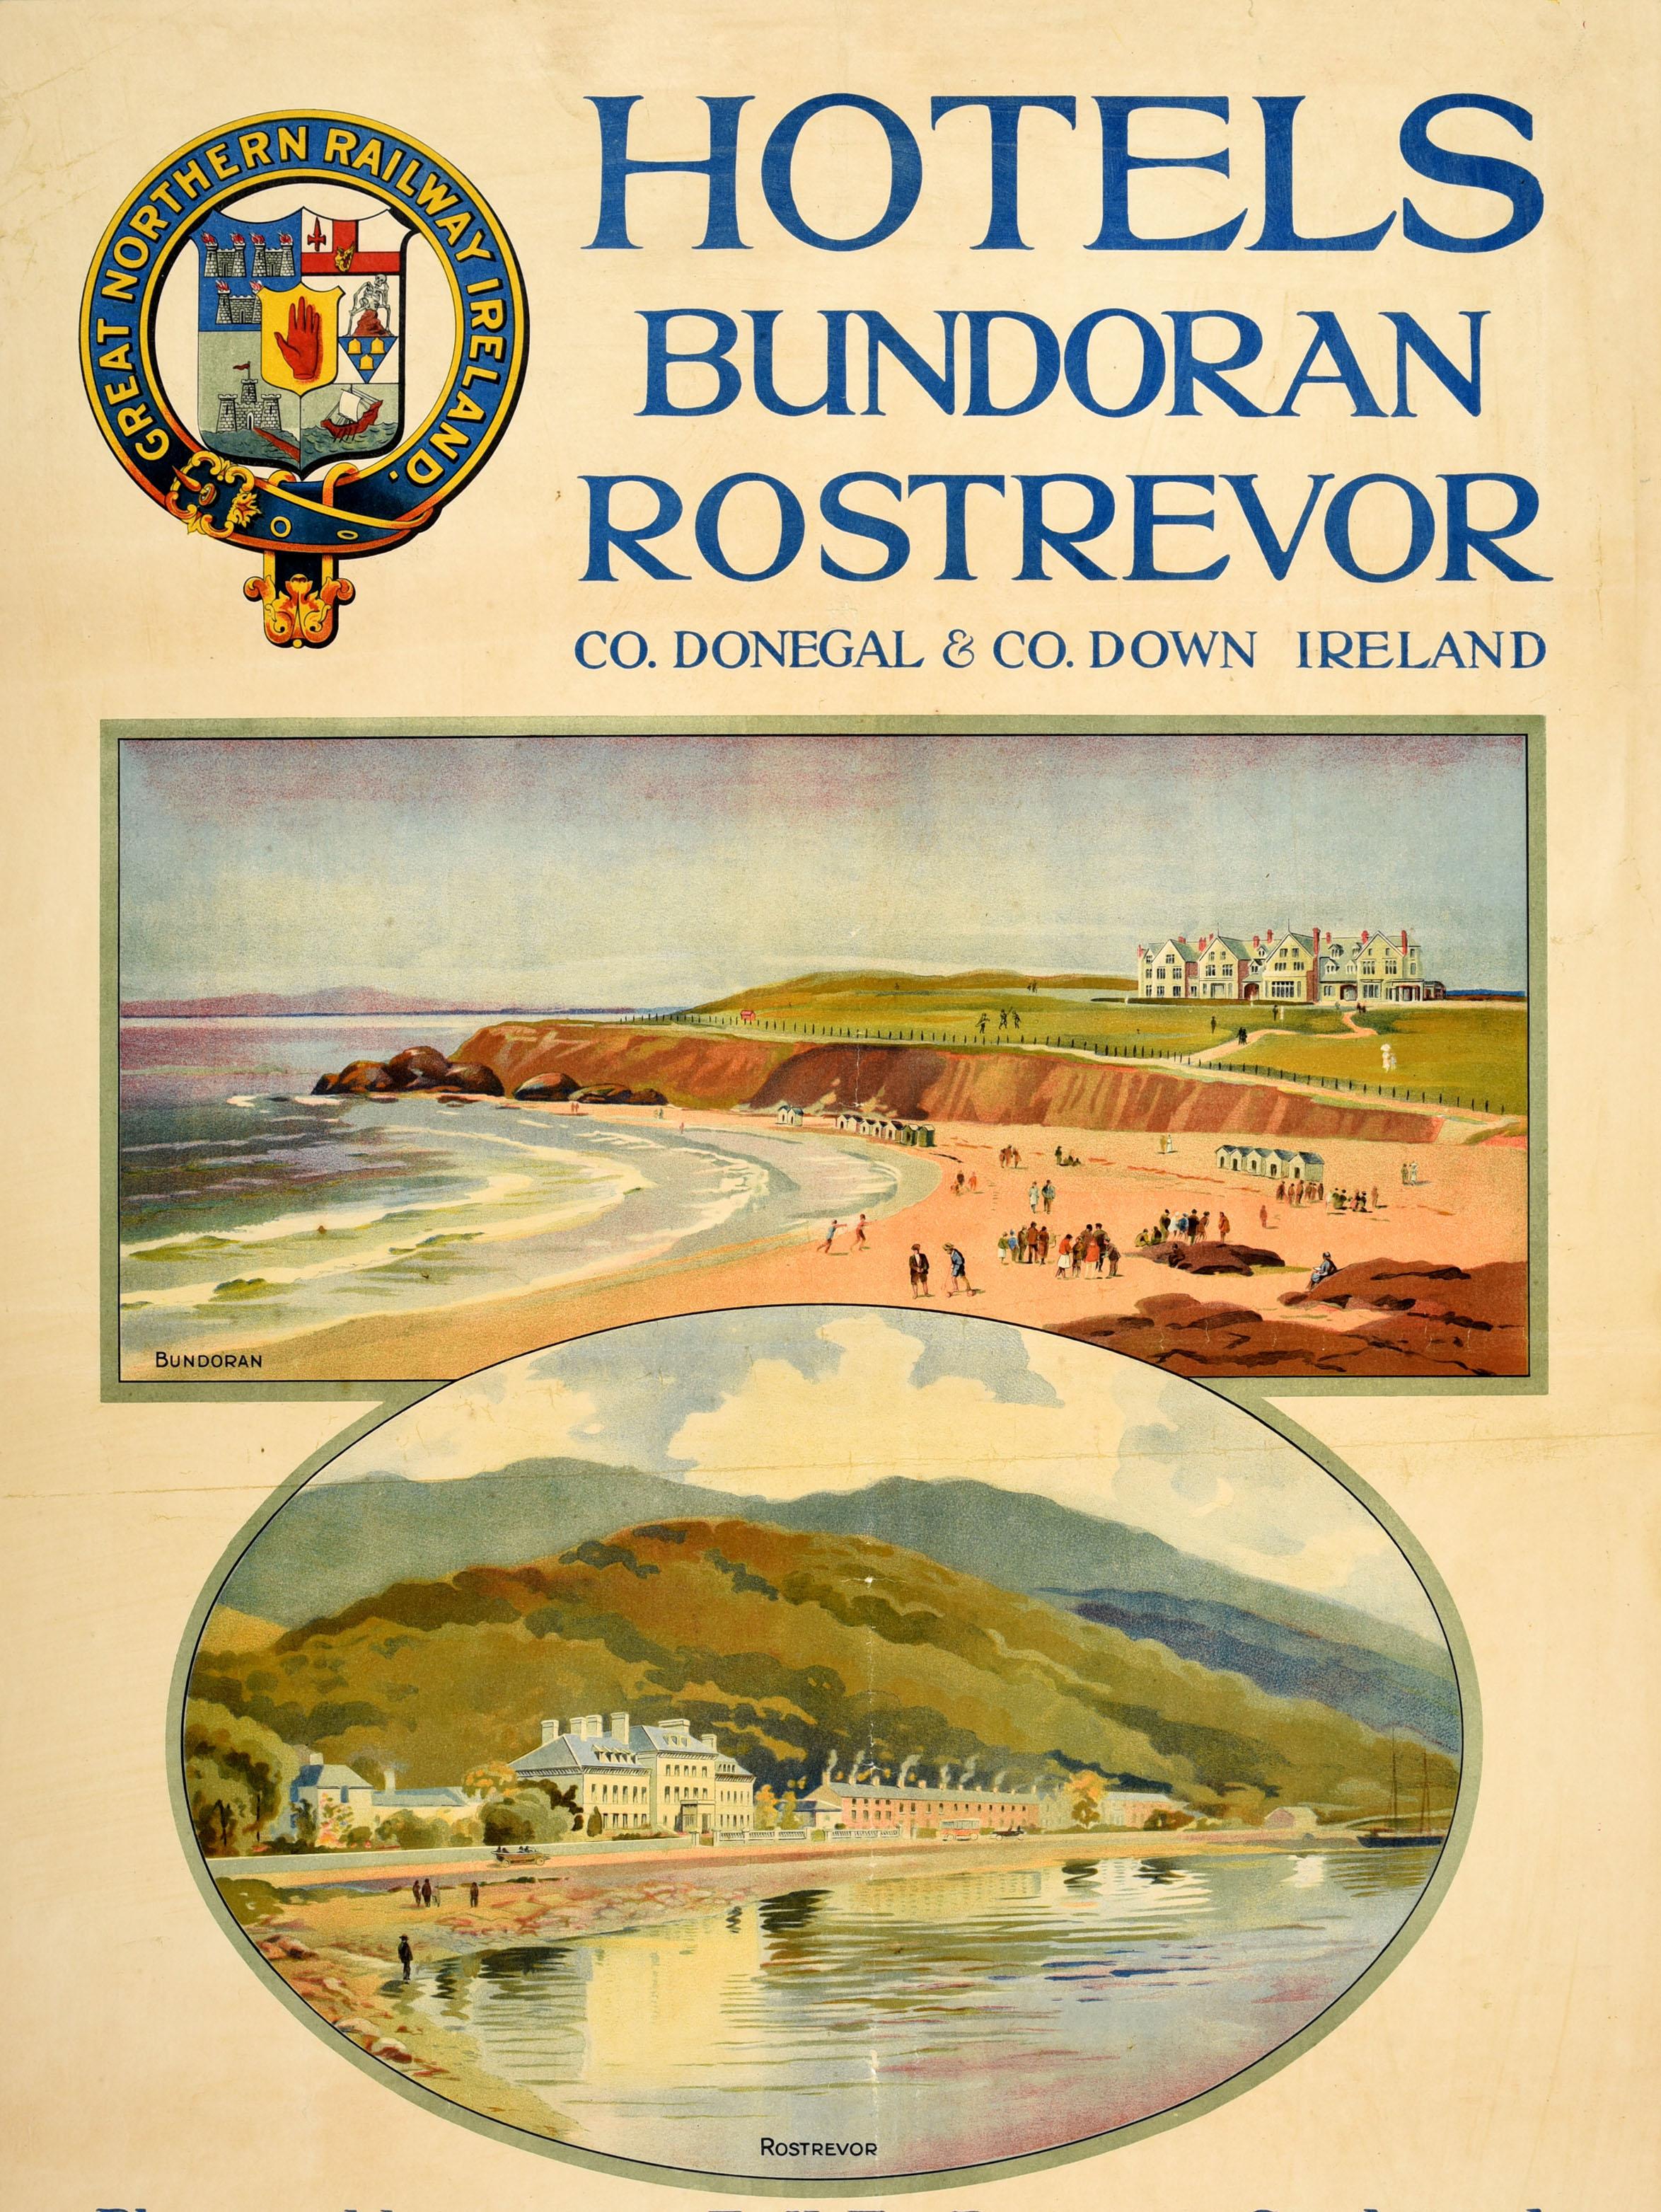 Original antique northern Ireland travel poster - Hotels Bundoran Rostrevor County Donegal & County Down Ireland - features two picturesque views depicting holiday makers enjoying the sandy beach at the seaside with beach huts and walks along the